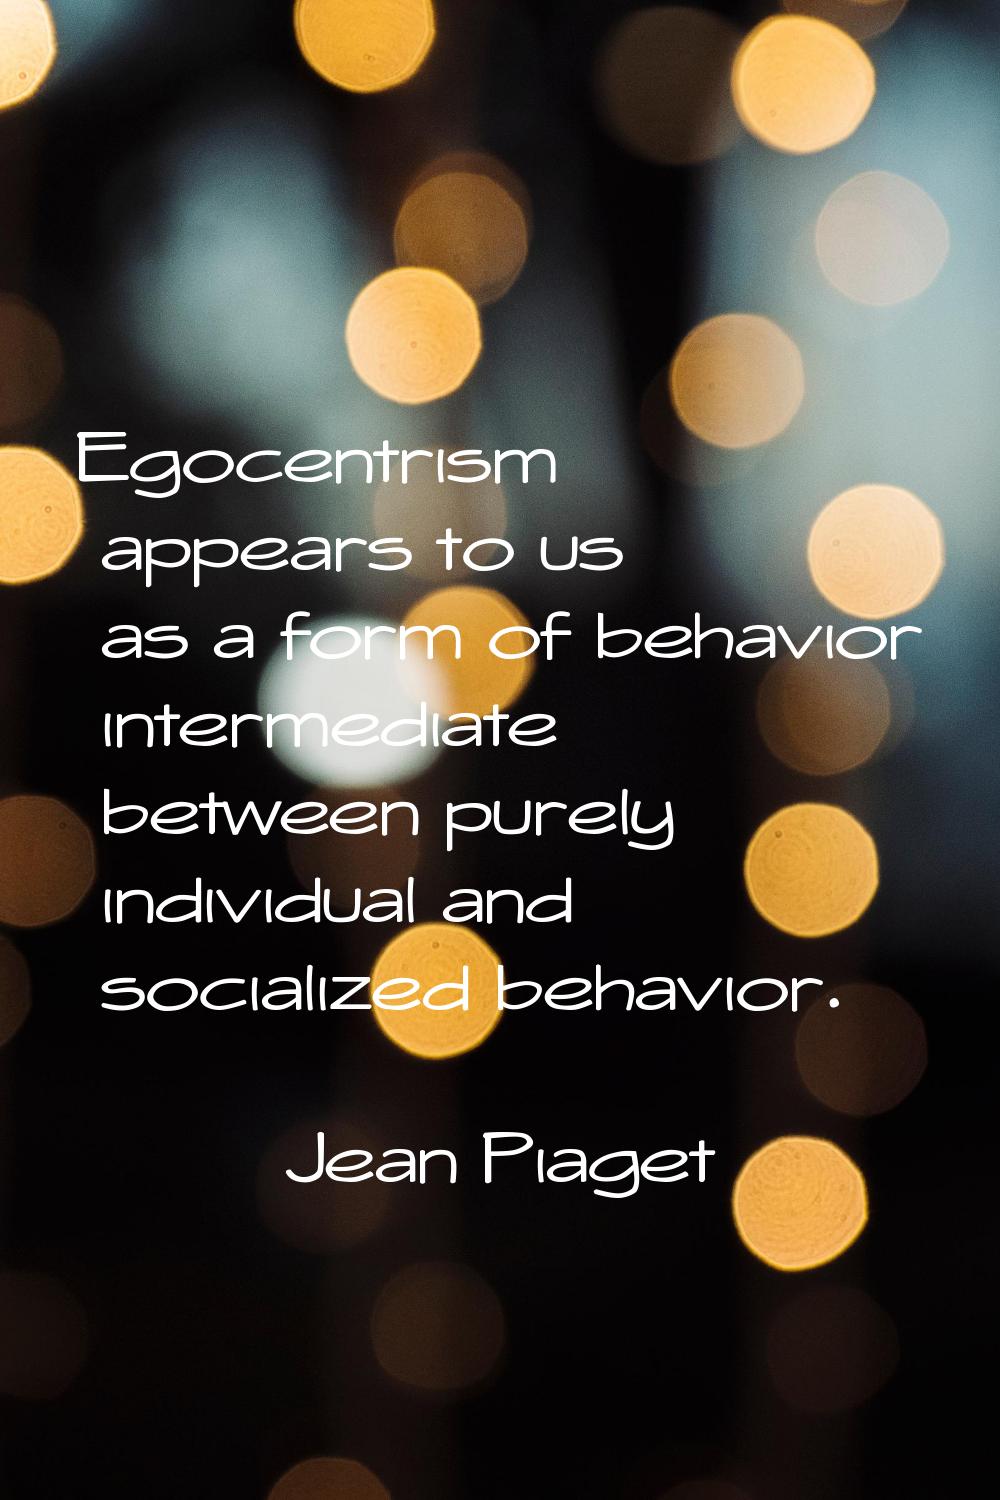 Egocentrism appears to us as a form of behavior intermediate between purely individual and socializ